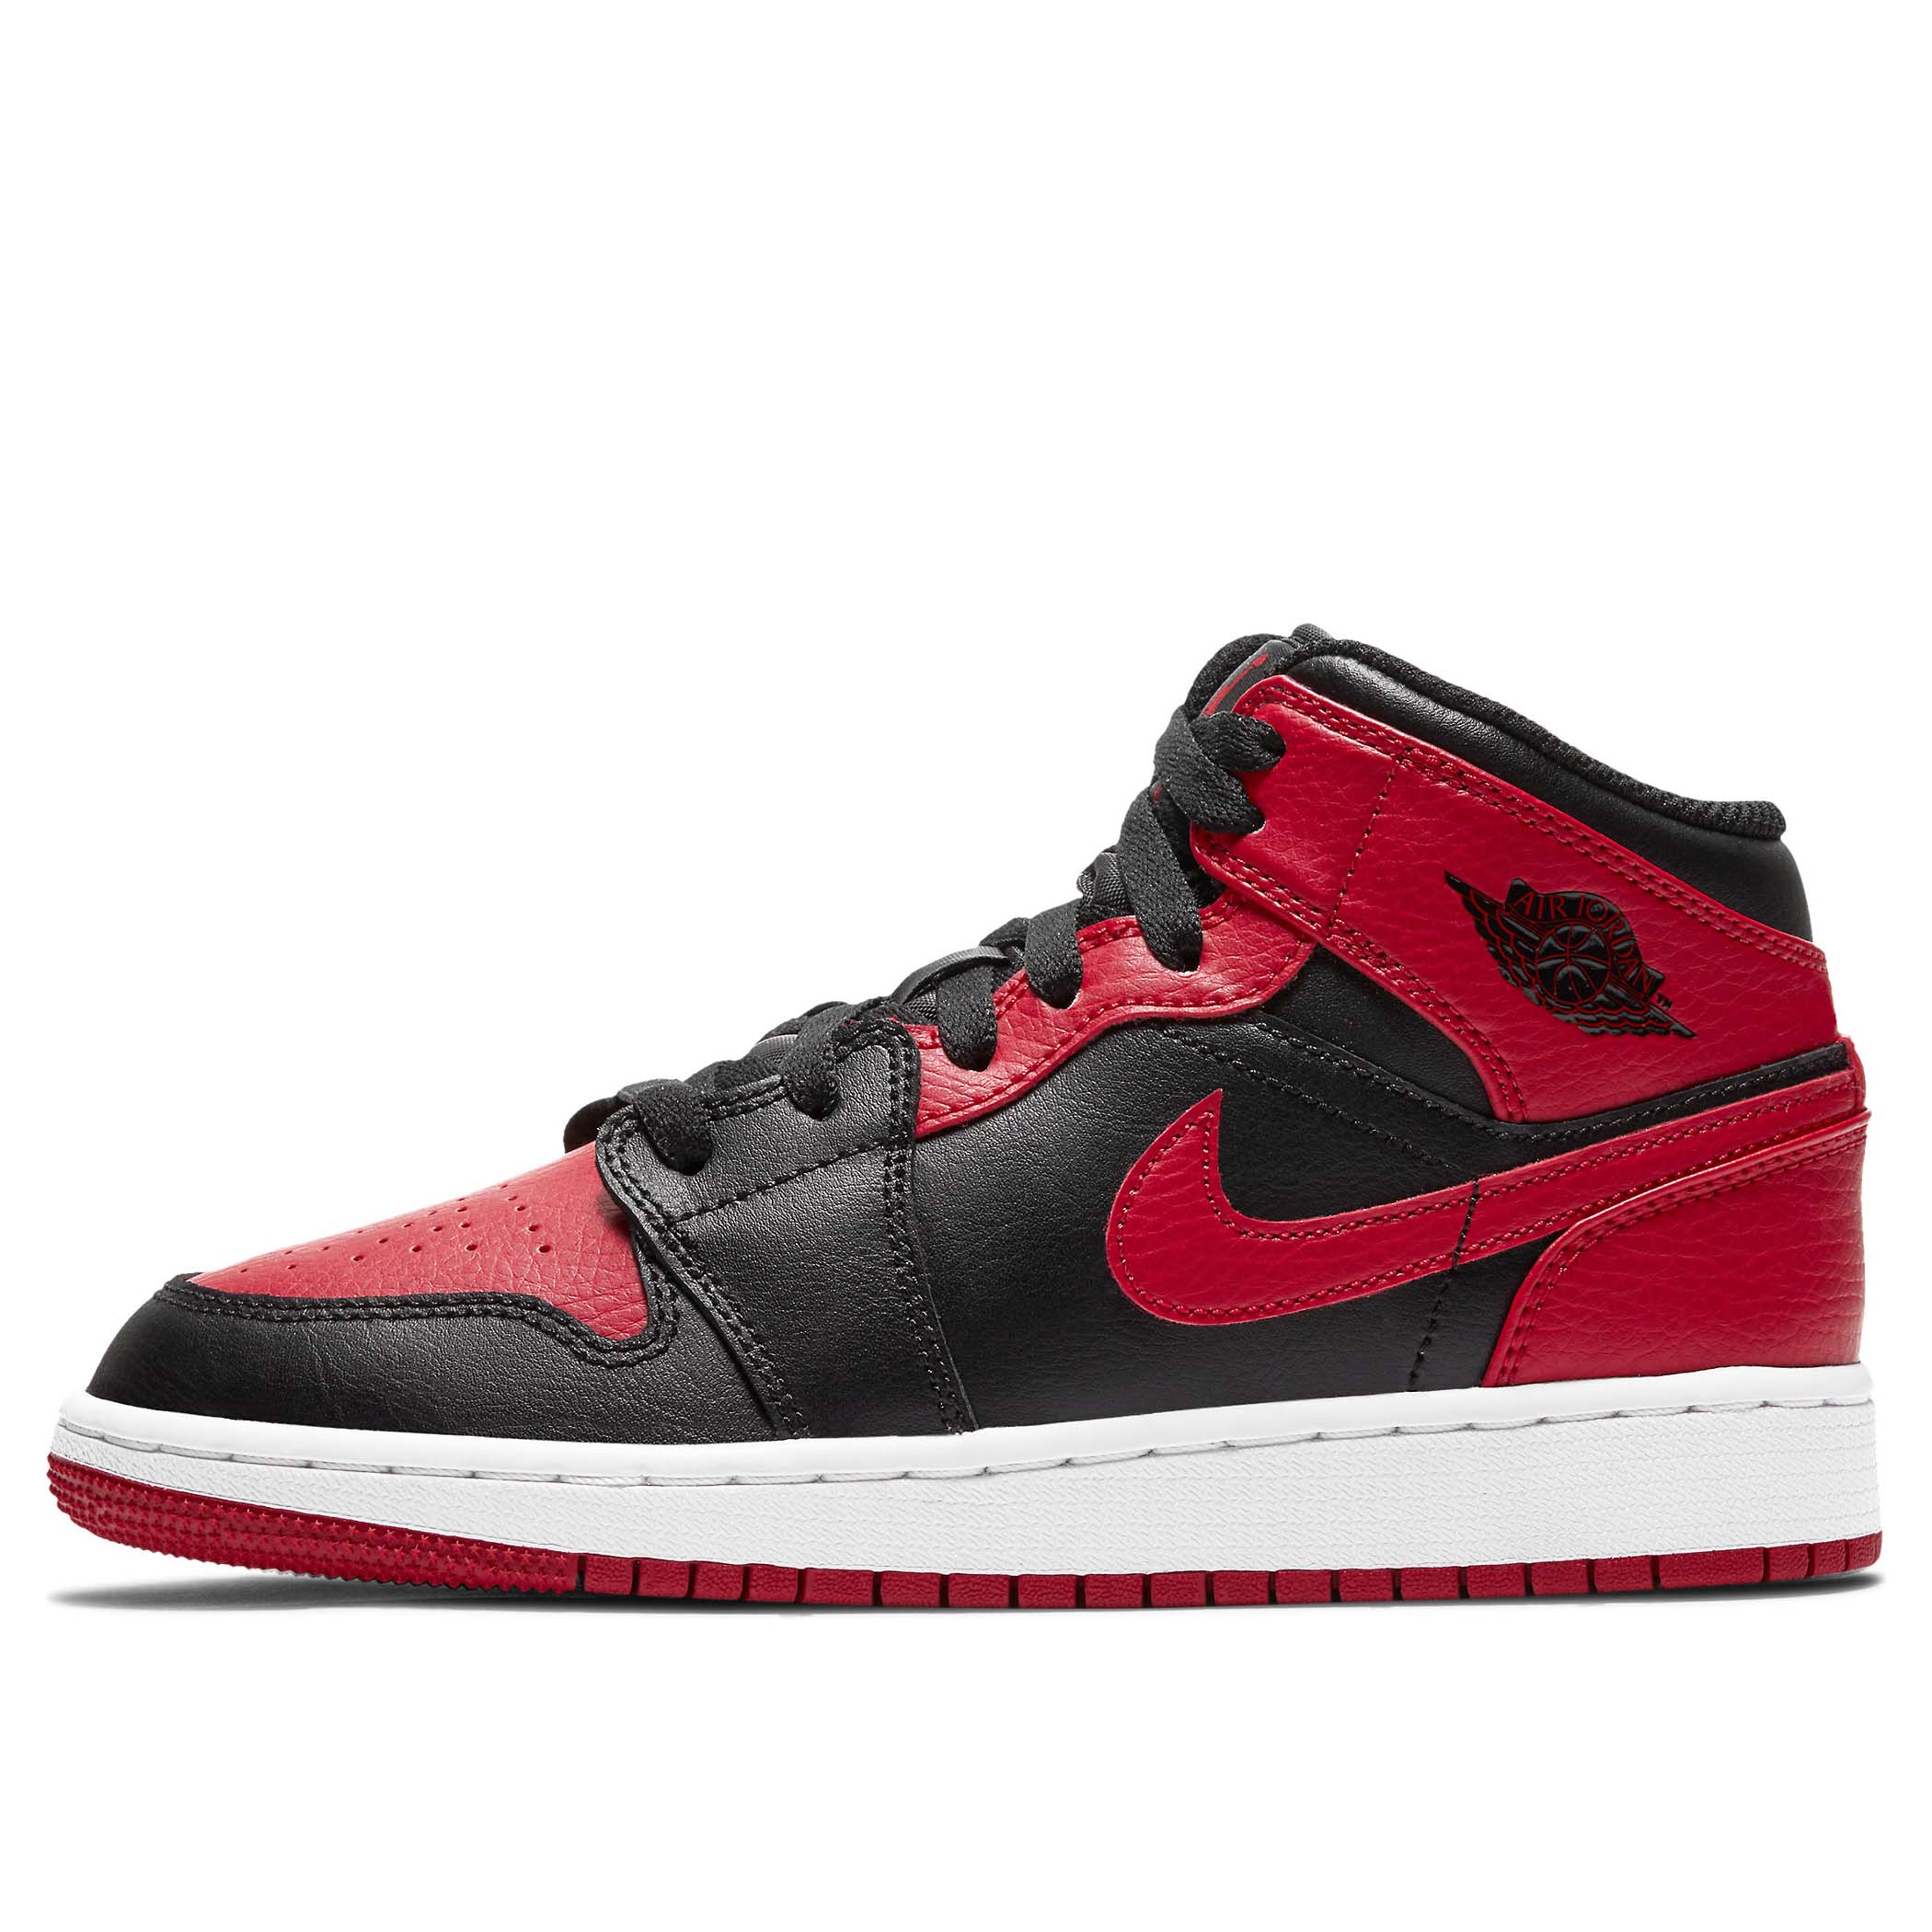 Mid (GS) 554725-074 Black/Gym Red-White 